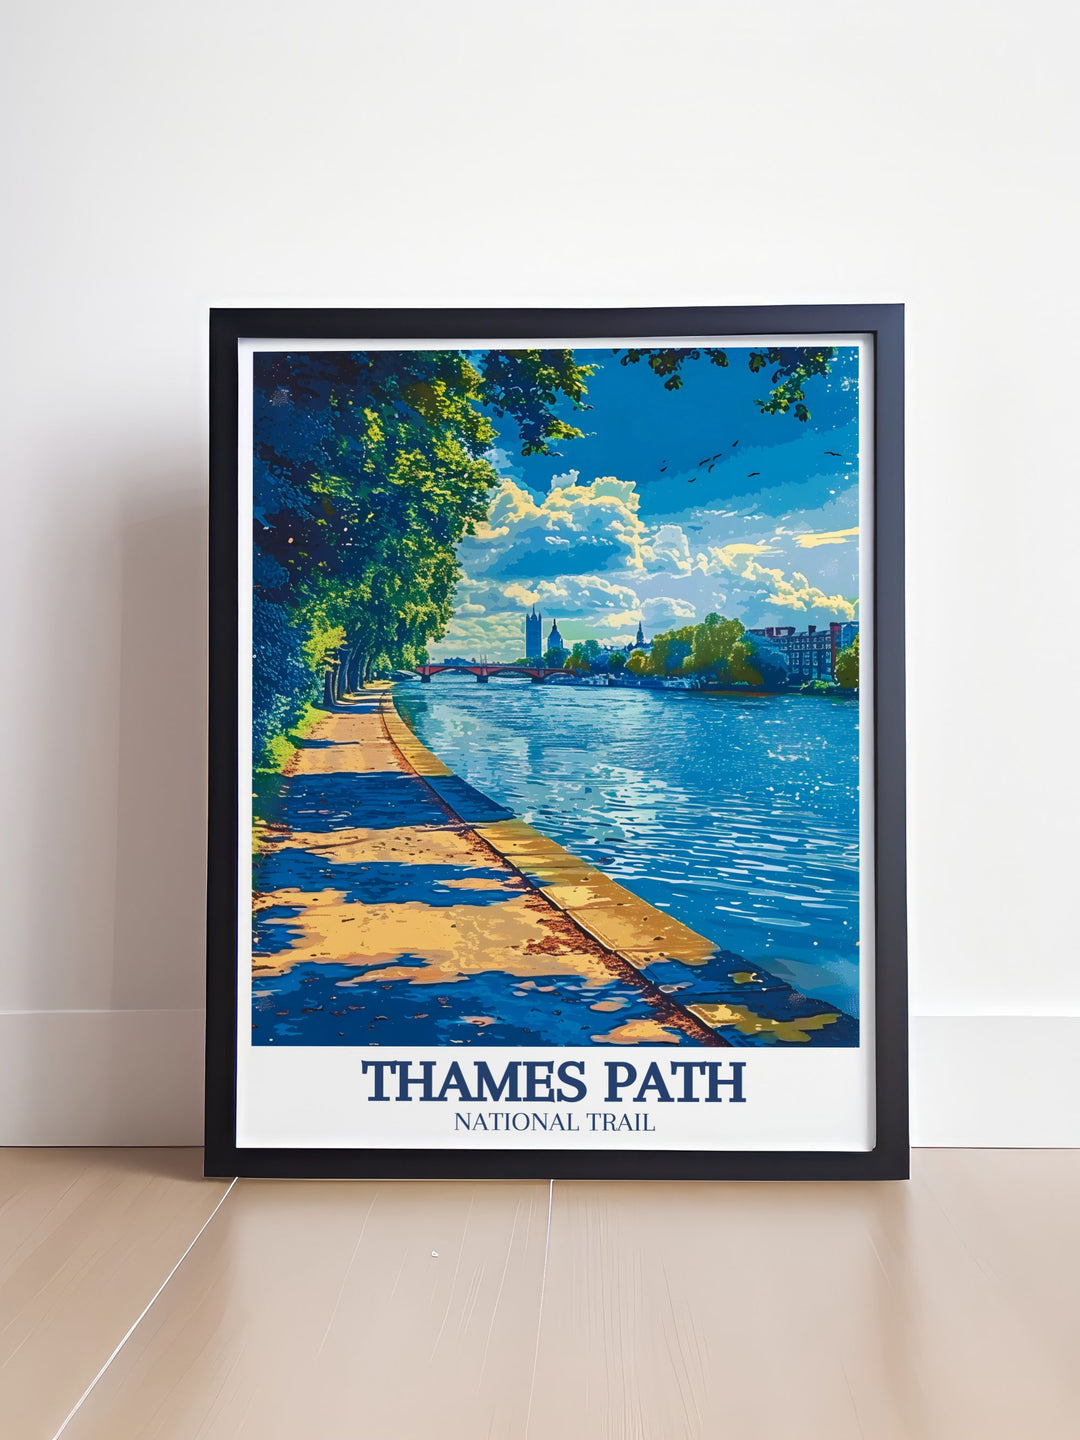 High quality River Thames, Big Ben print showcasing the picturesque views of the Thames Path and the majestic Big Ben a timeless piece of decor celebrating Londons rich heritage and natural beauty